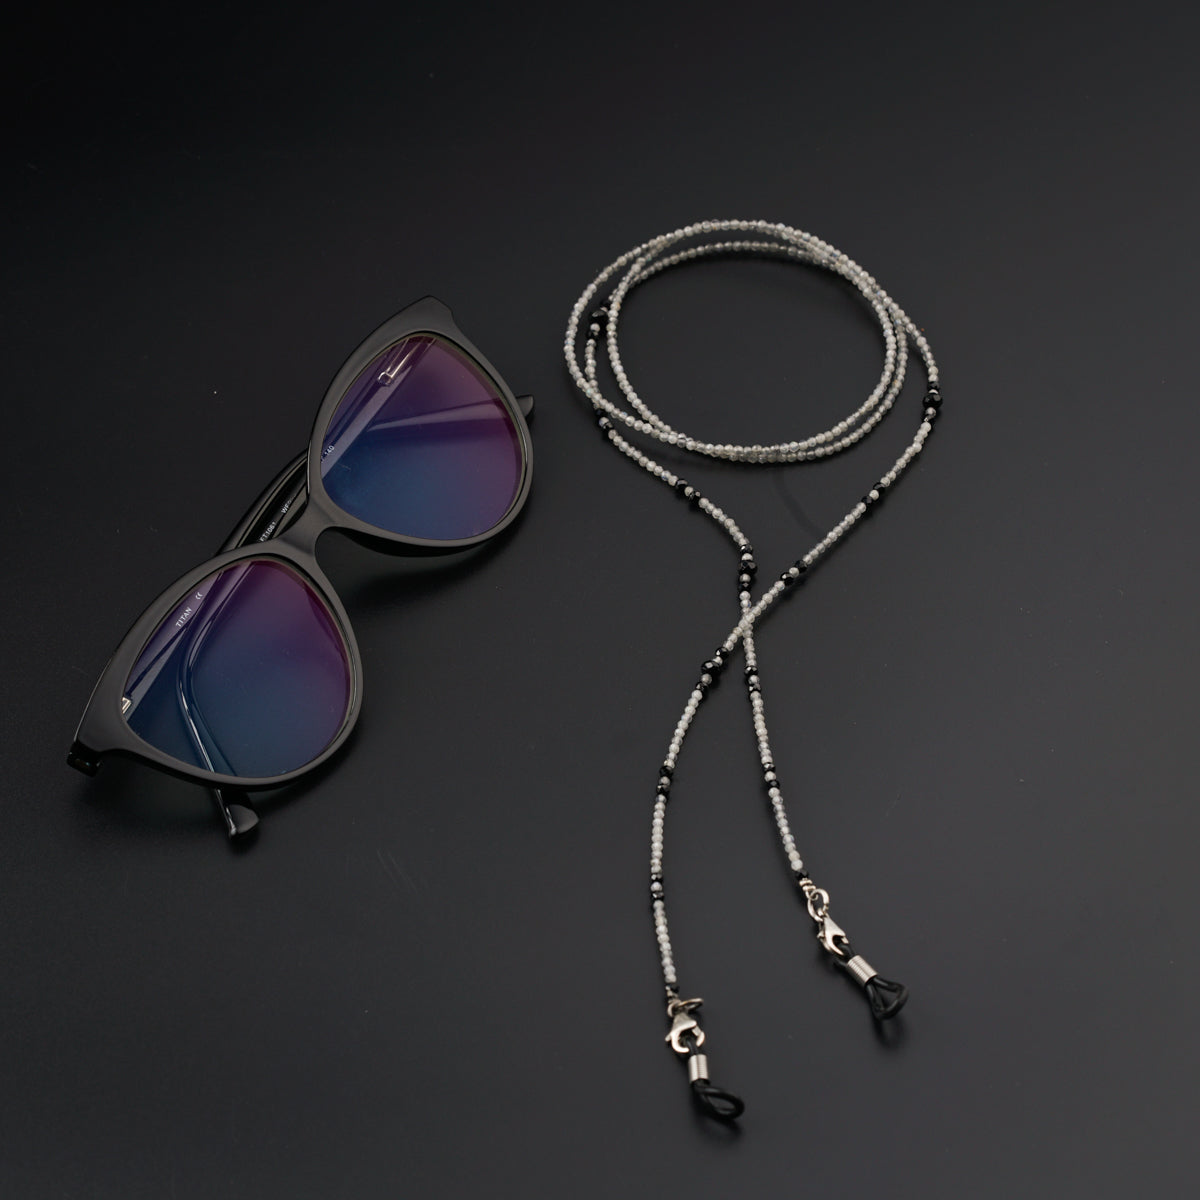 a pair of sunglasses and a lanyard on a black surface